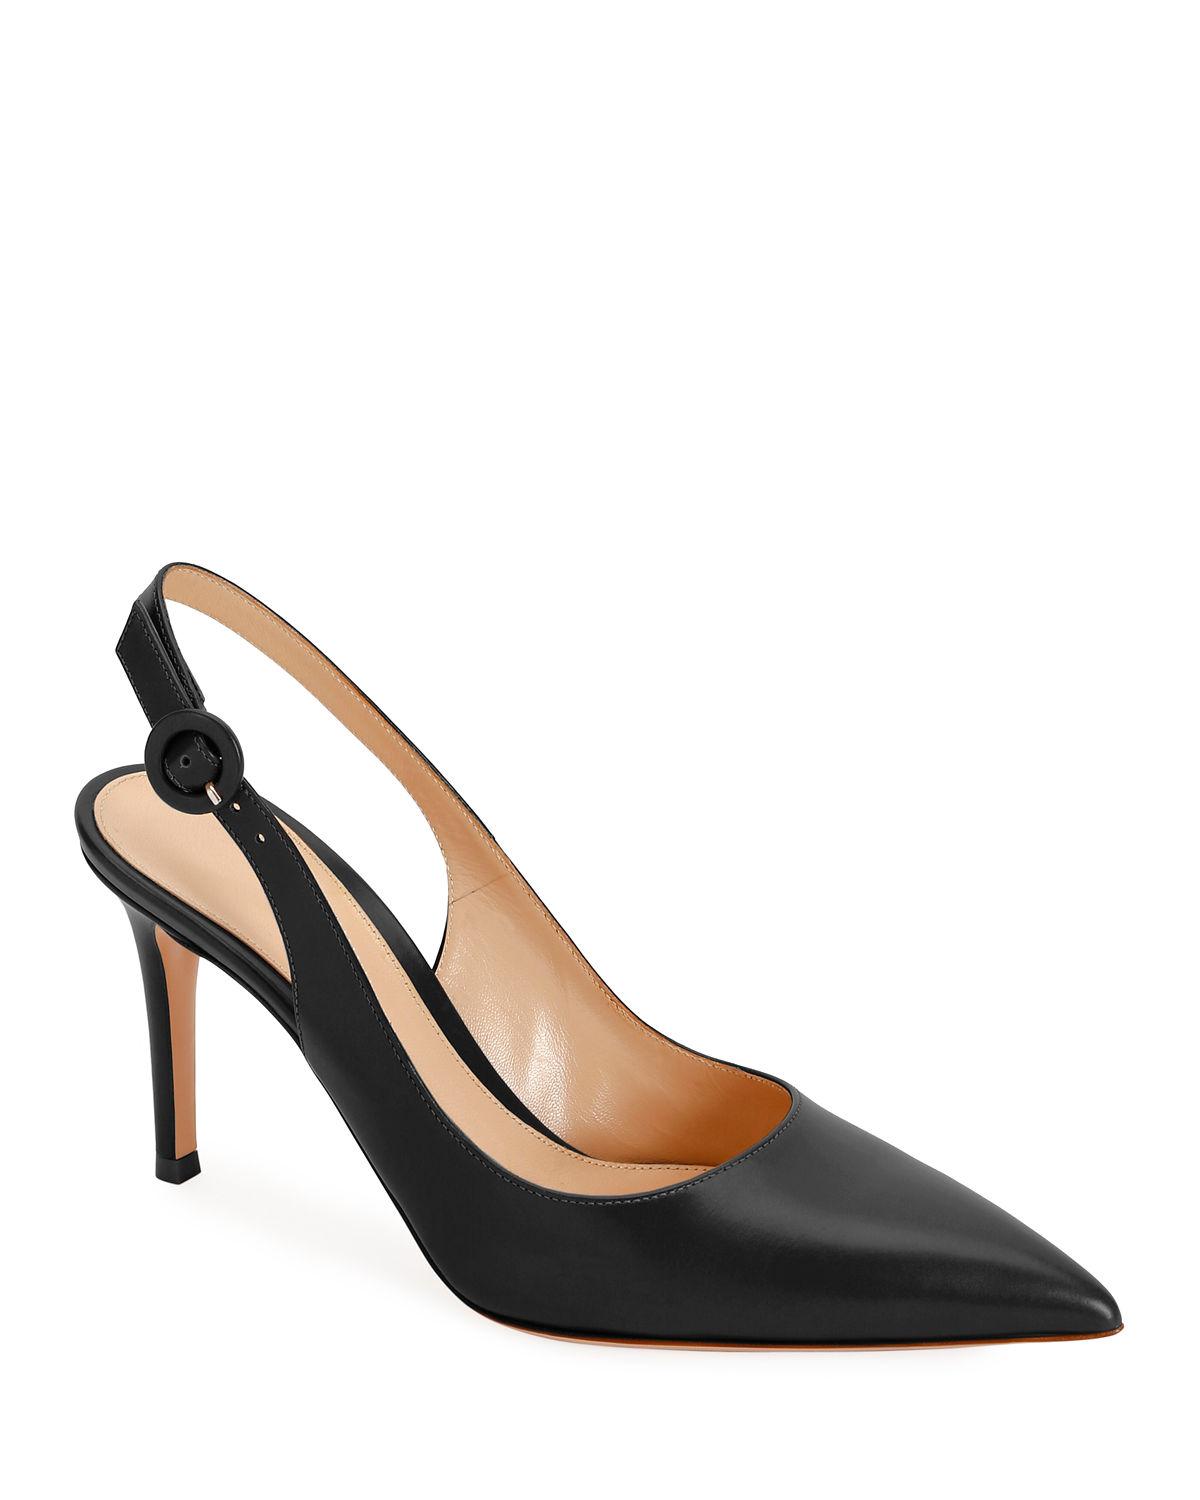 Gianvito Rossi Smooth Leather Slingback Pumps in Black - Lyst